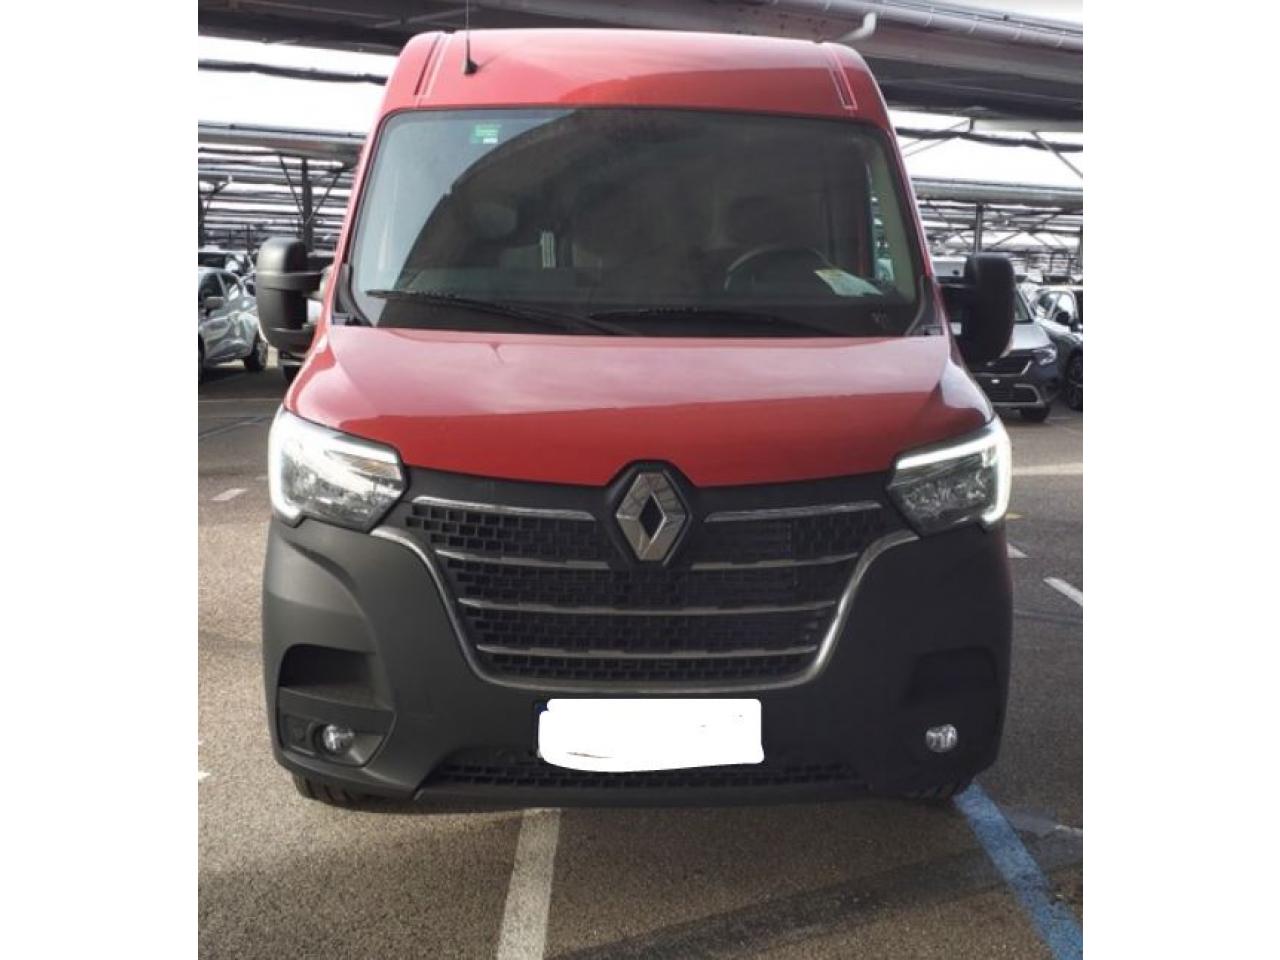 Véhicule OCCASION : RENAULT MASTER 3 PHASE 3 L3H2 - Beke